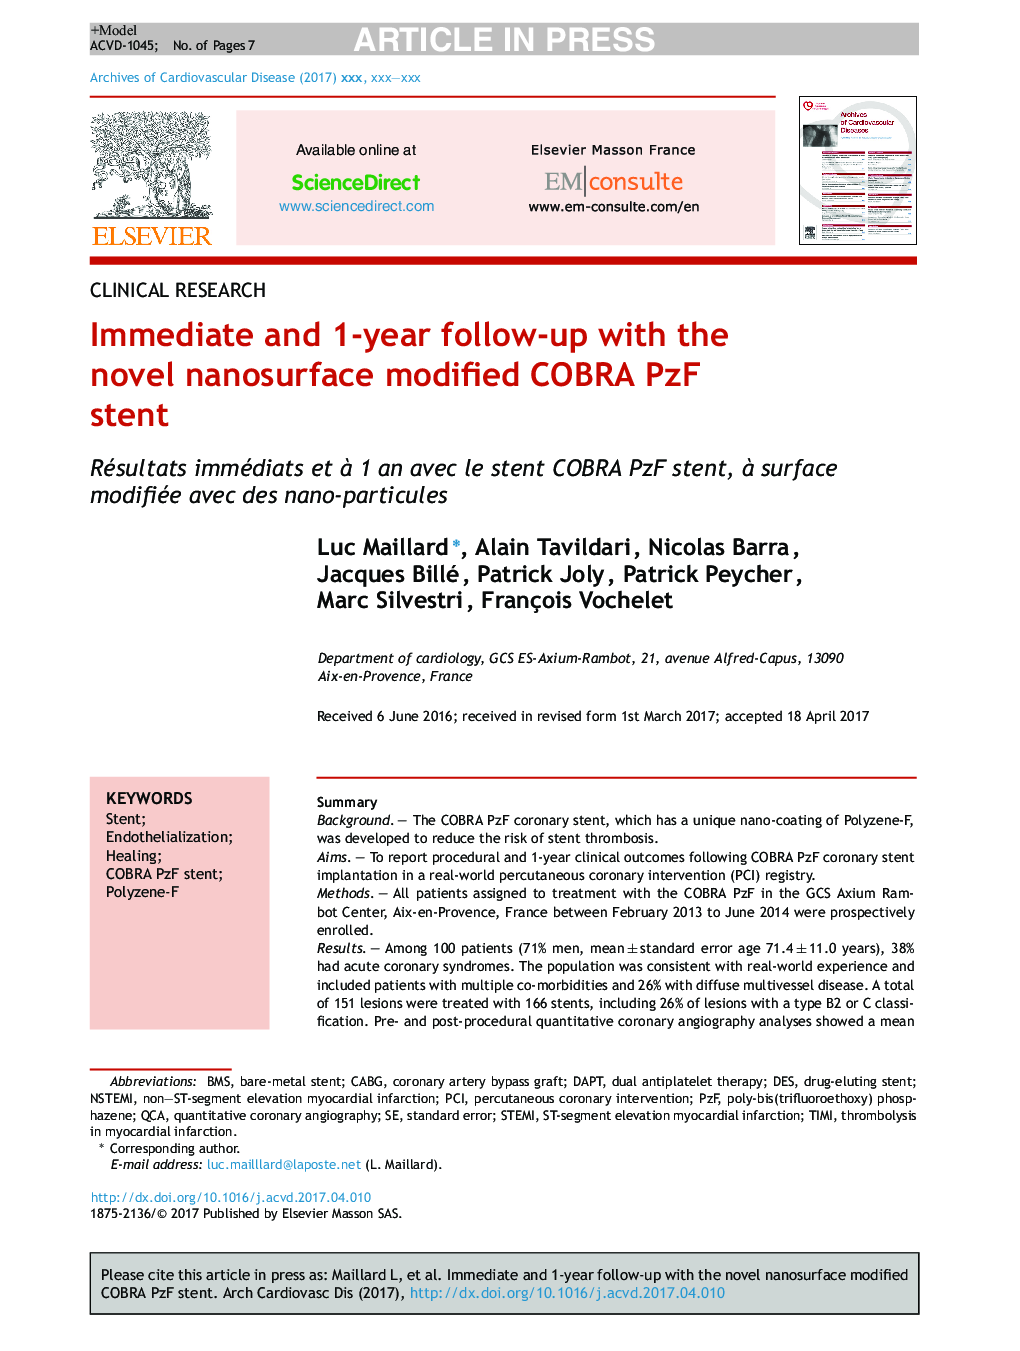 Immediate and 1-year follow-up with the novel nanosurface modified COBRA PzF stent